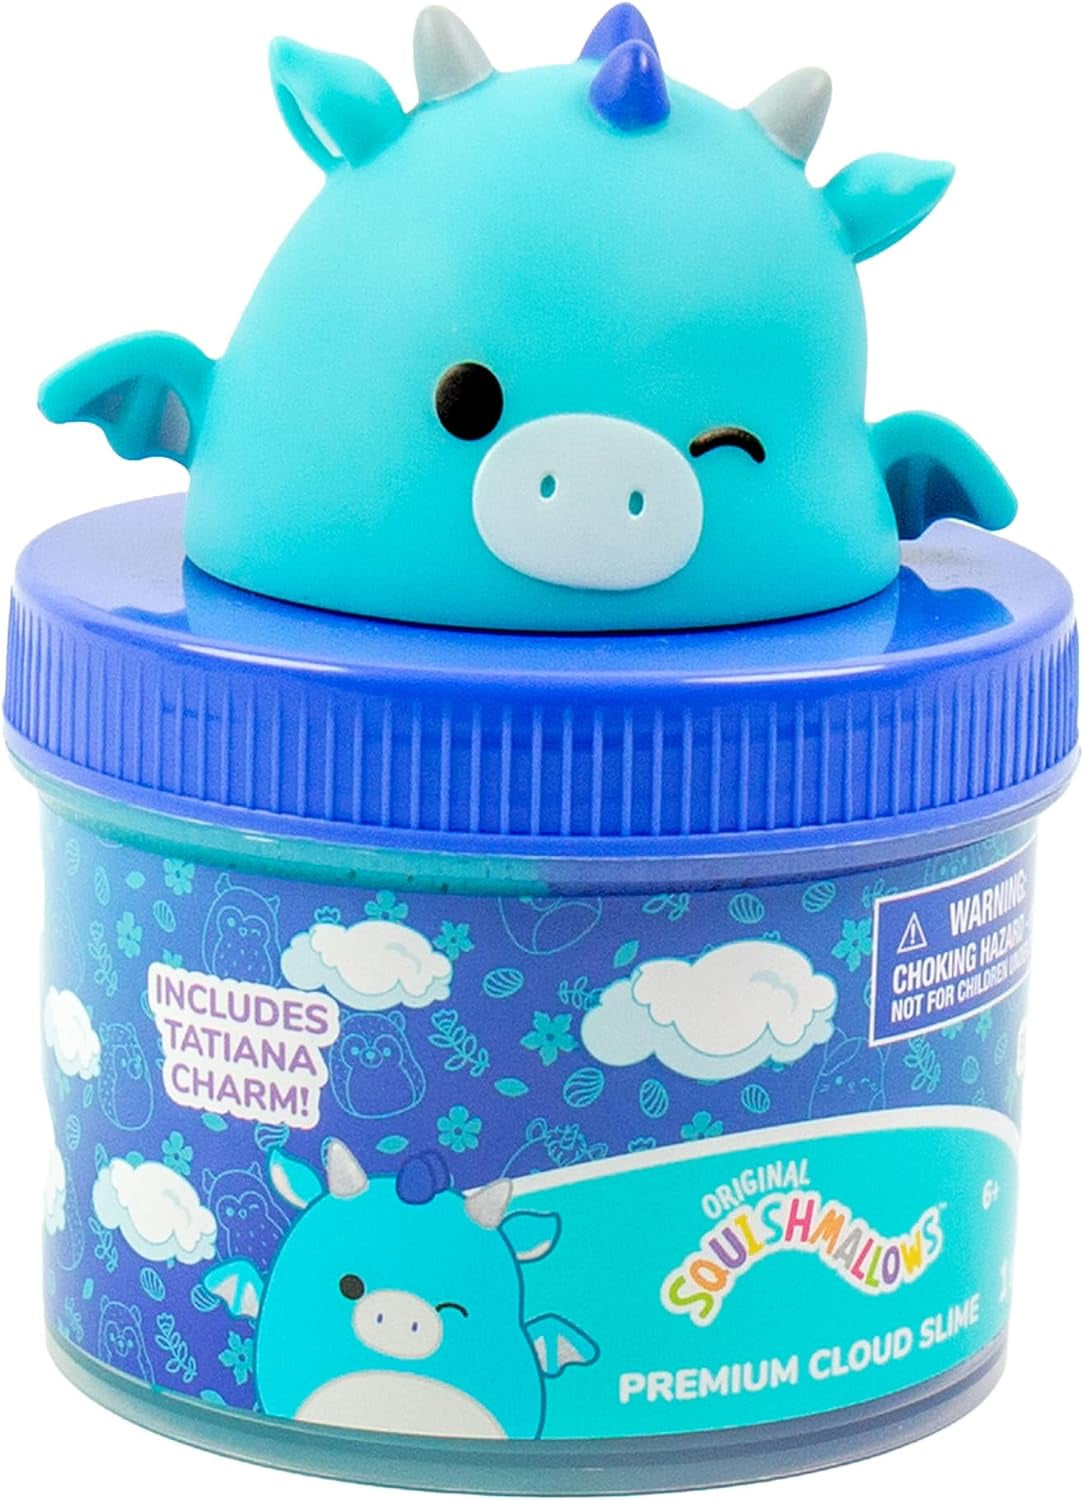 Original Tatiana the Dragon Premium Scented Slime, 8 Oz. Smooth Slime, Blue Raspberry Scented, 3 Fun Slime Add Ins, Pre-Made Slime for Kids, Great 6 Year Old Toys, Super Soft Sludge Toy